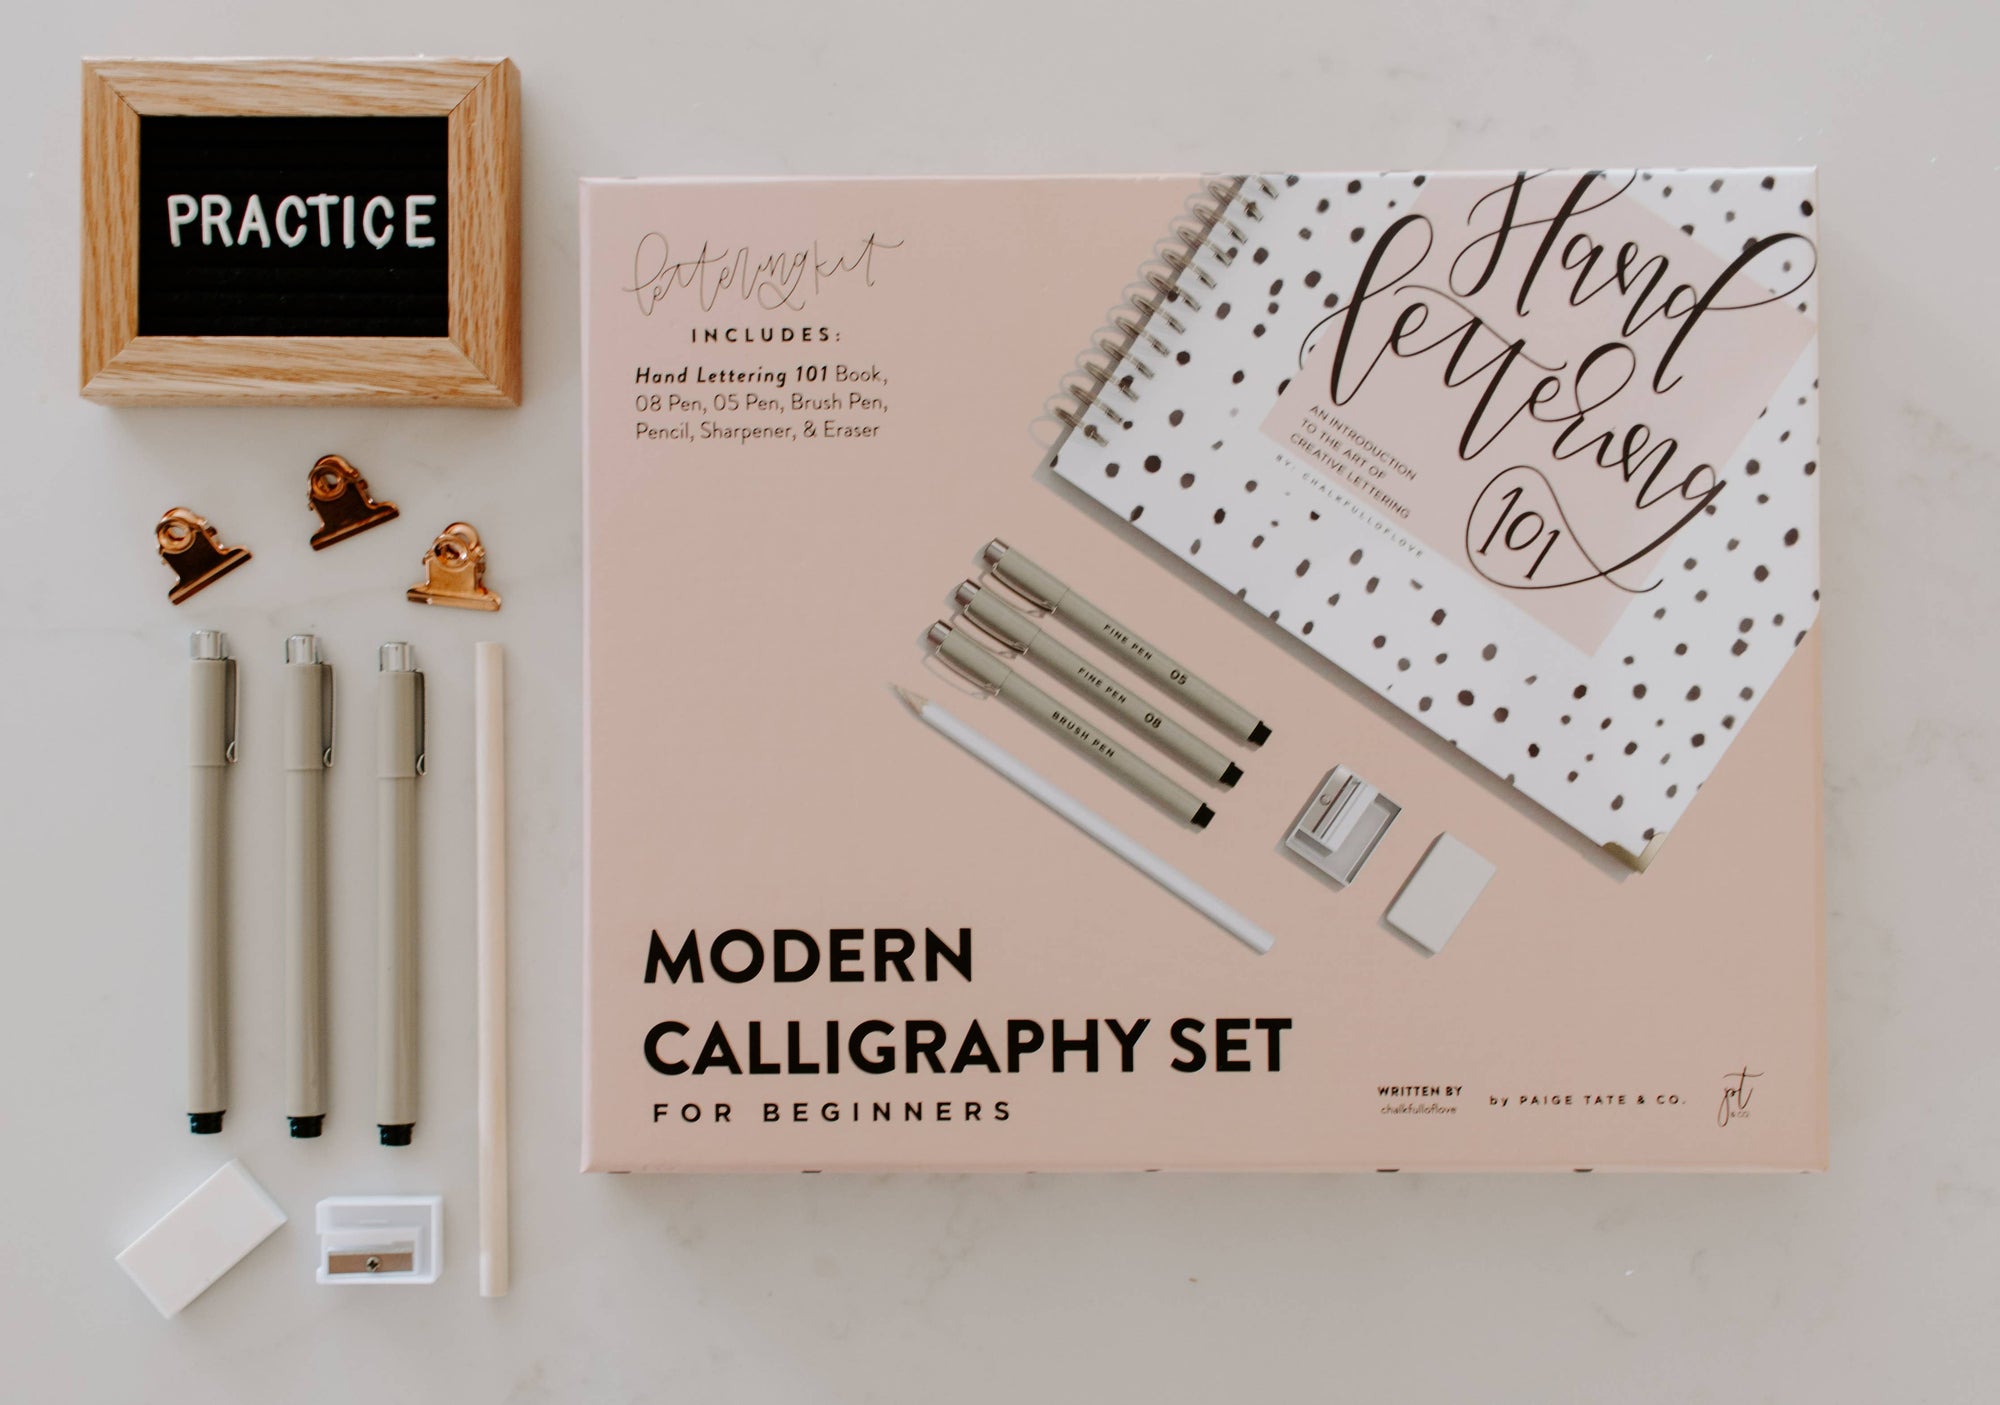 A Modern Calligraphy Set for Beginners featuring creative lettering pens and pencils.